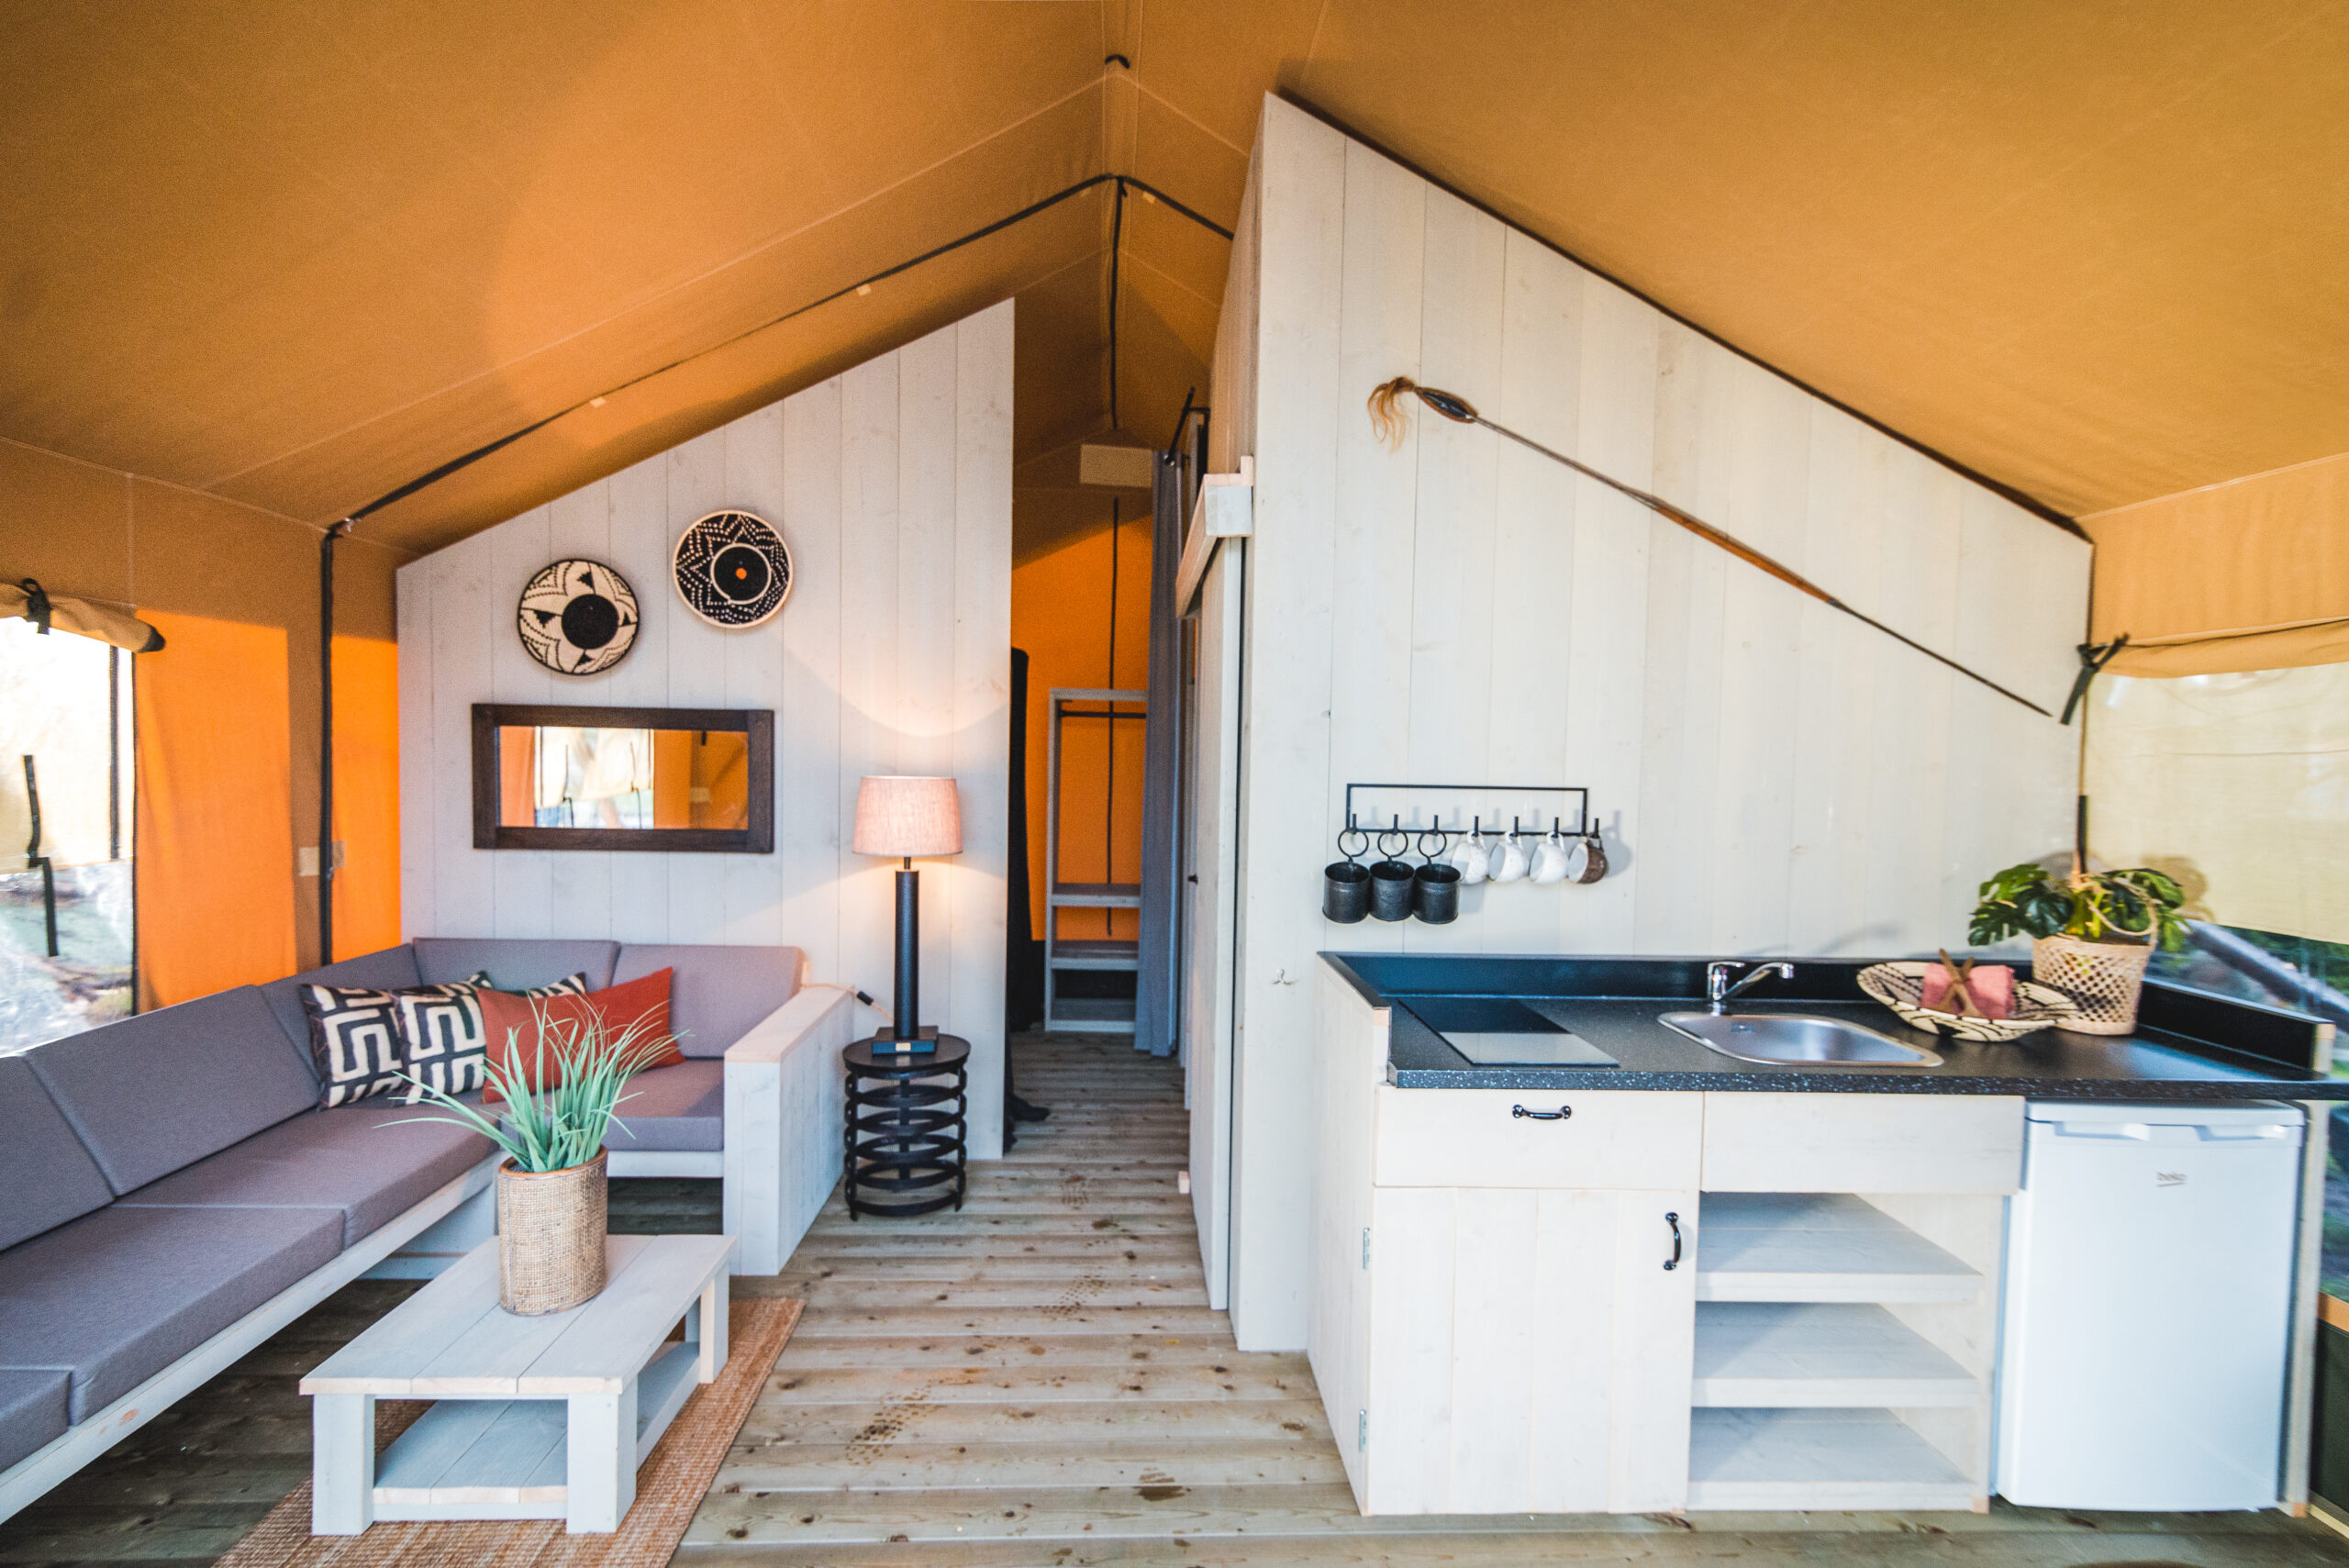 Tips for styling your safari tent